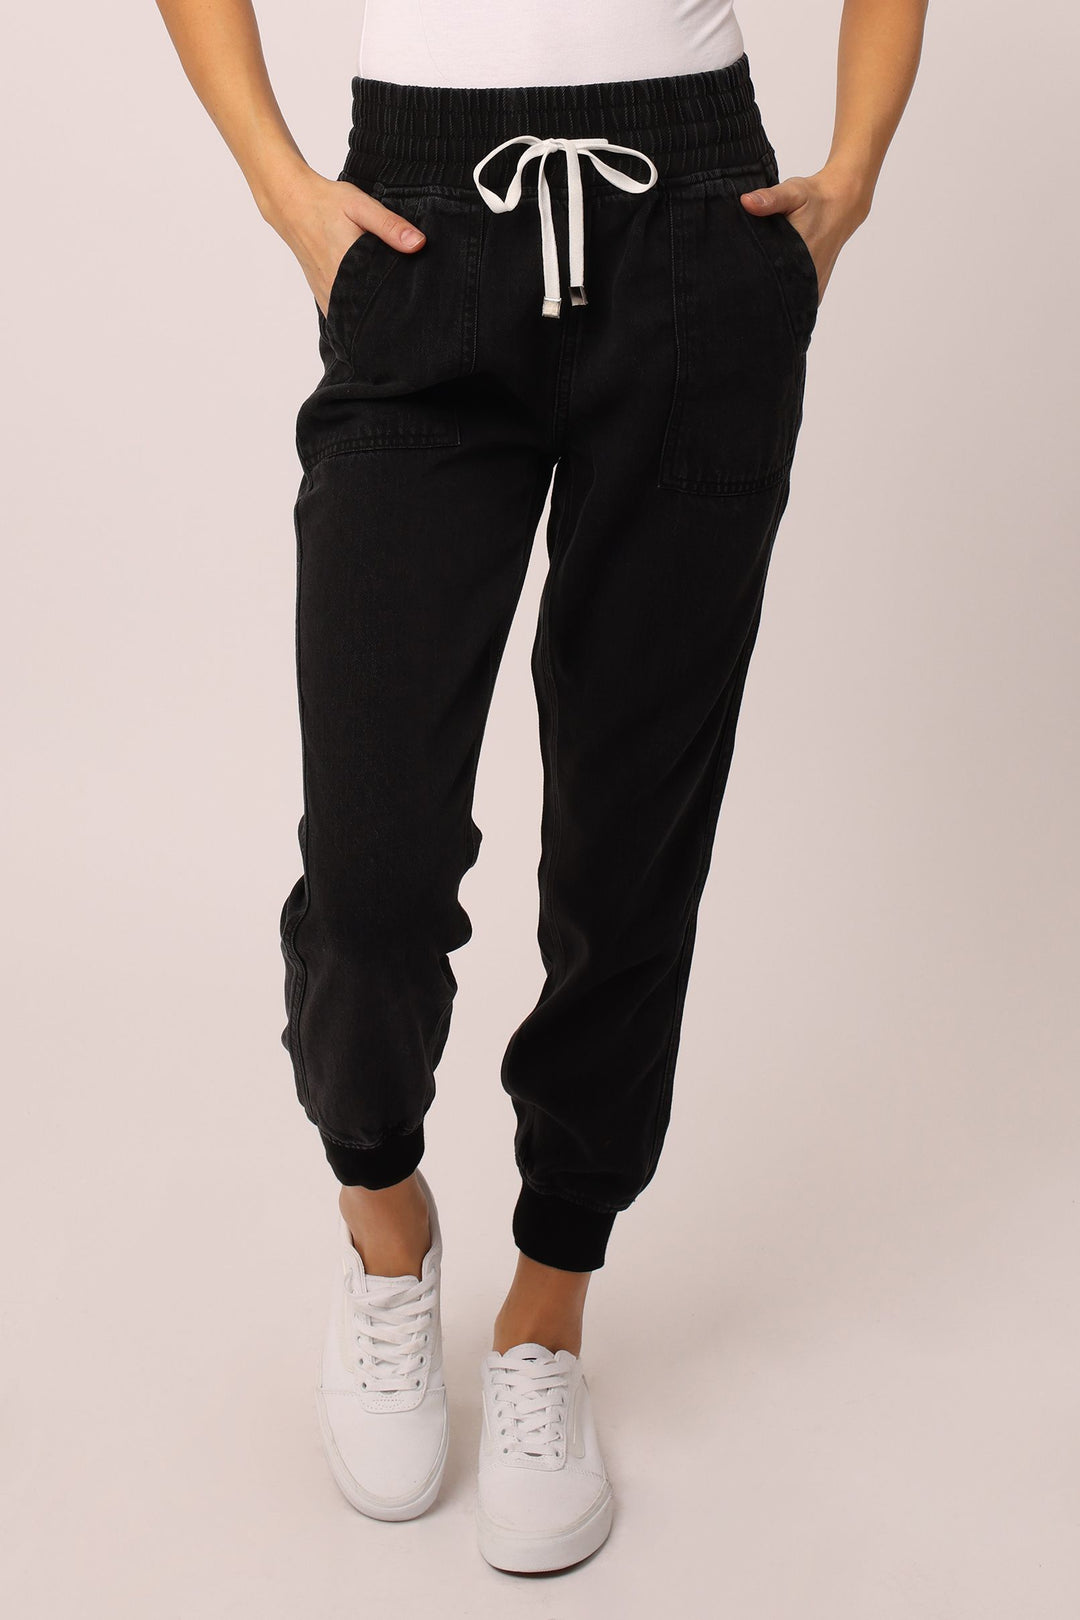 BLACK JACEY JOGGER HIGH RISE - Kingfisher Road - Online Boutique